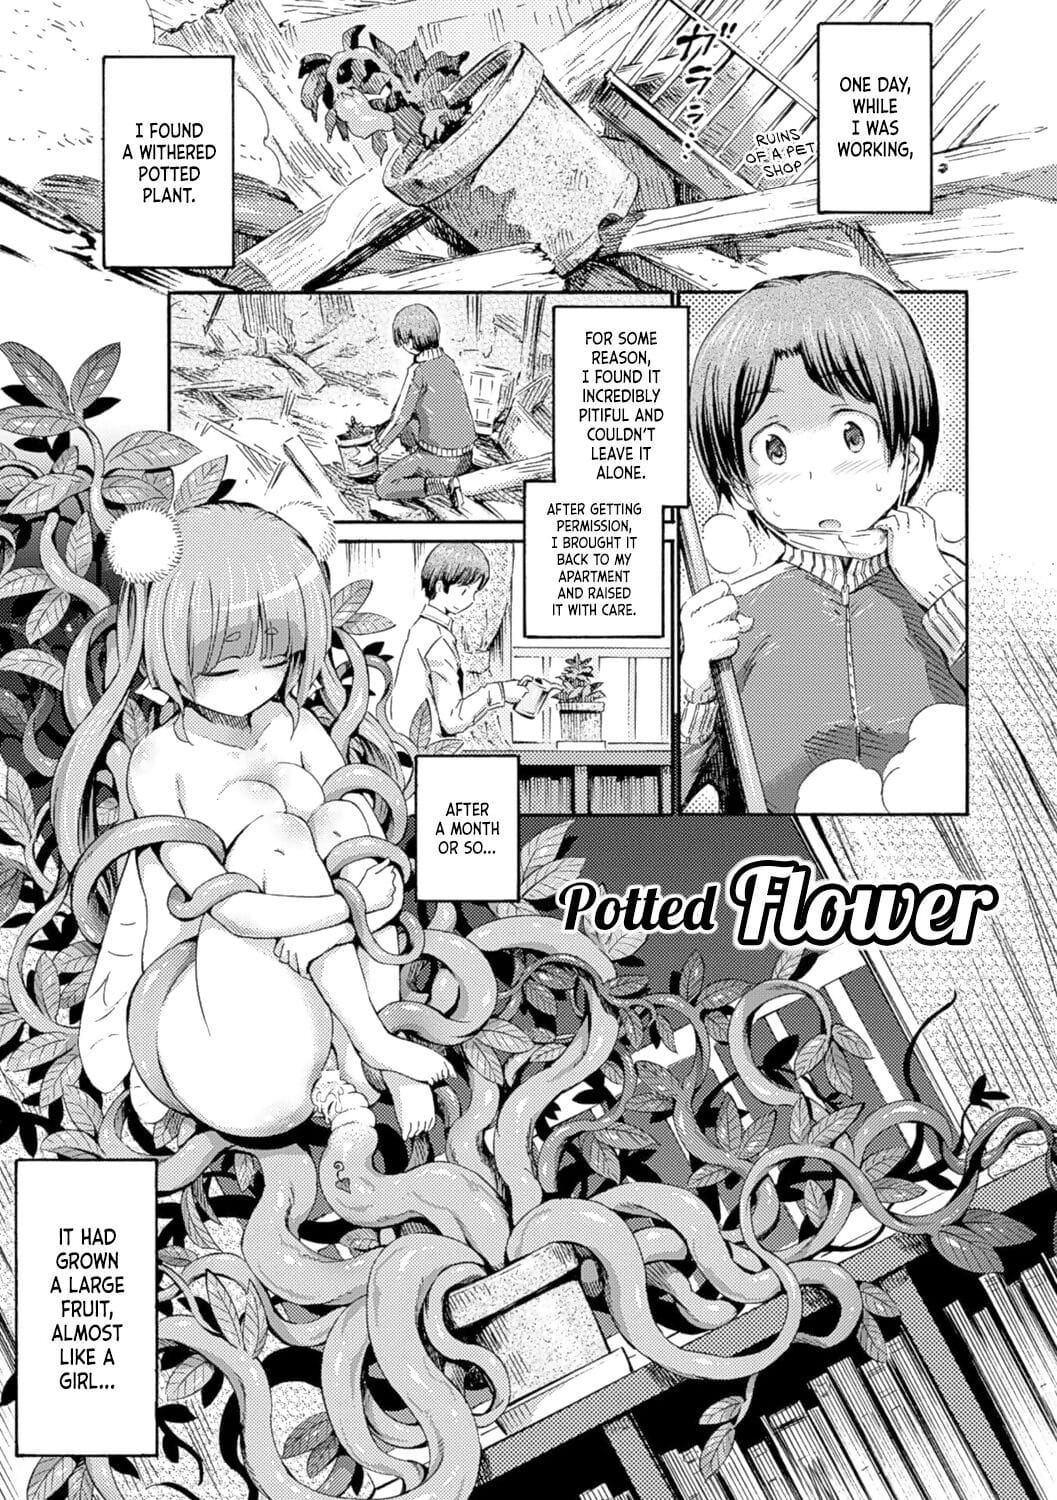 Hachi no Ue no Flower - Potted Flower page 1